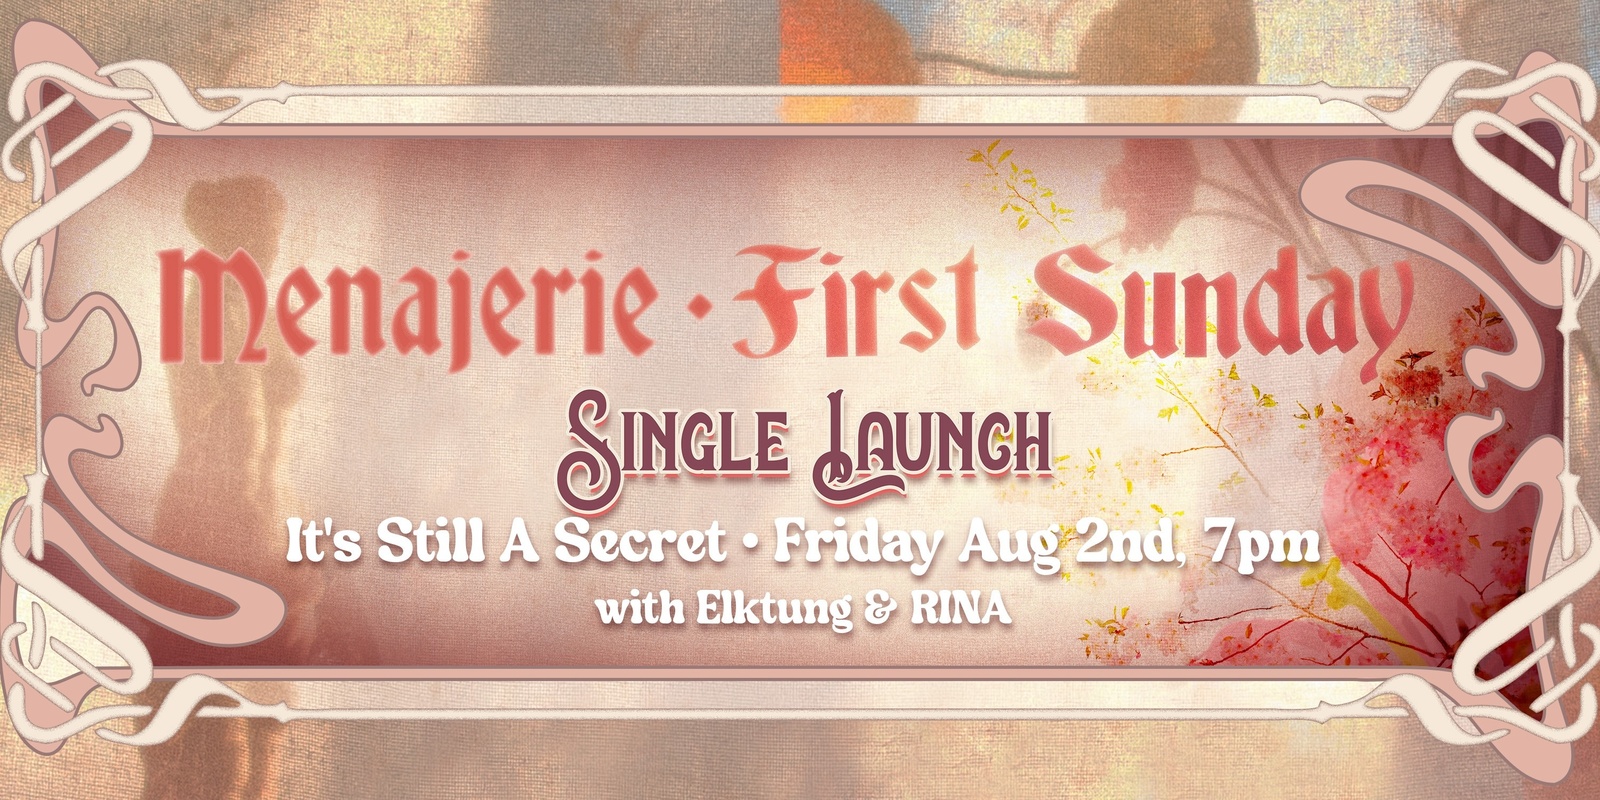 Banner image for Menajerie ‘First Sunday’ single launch